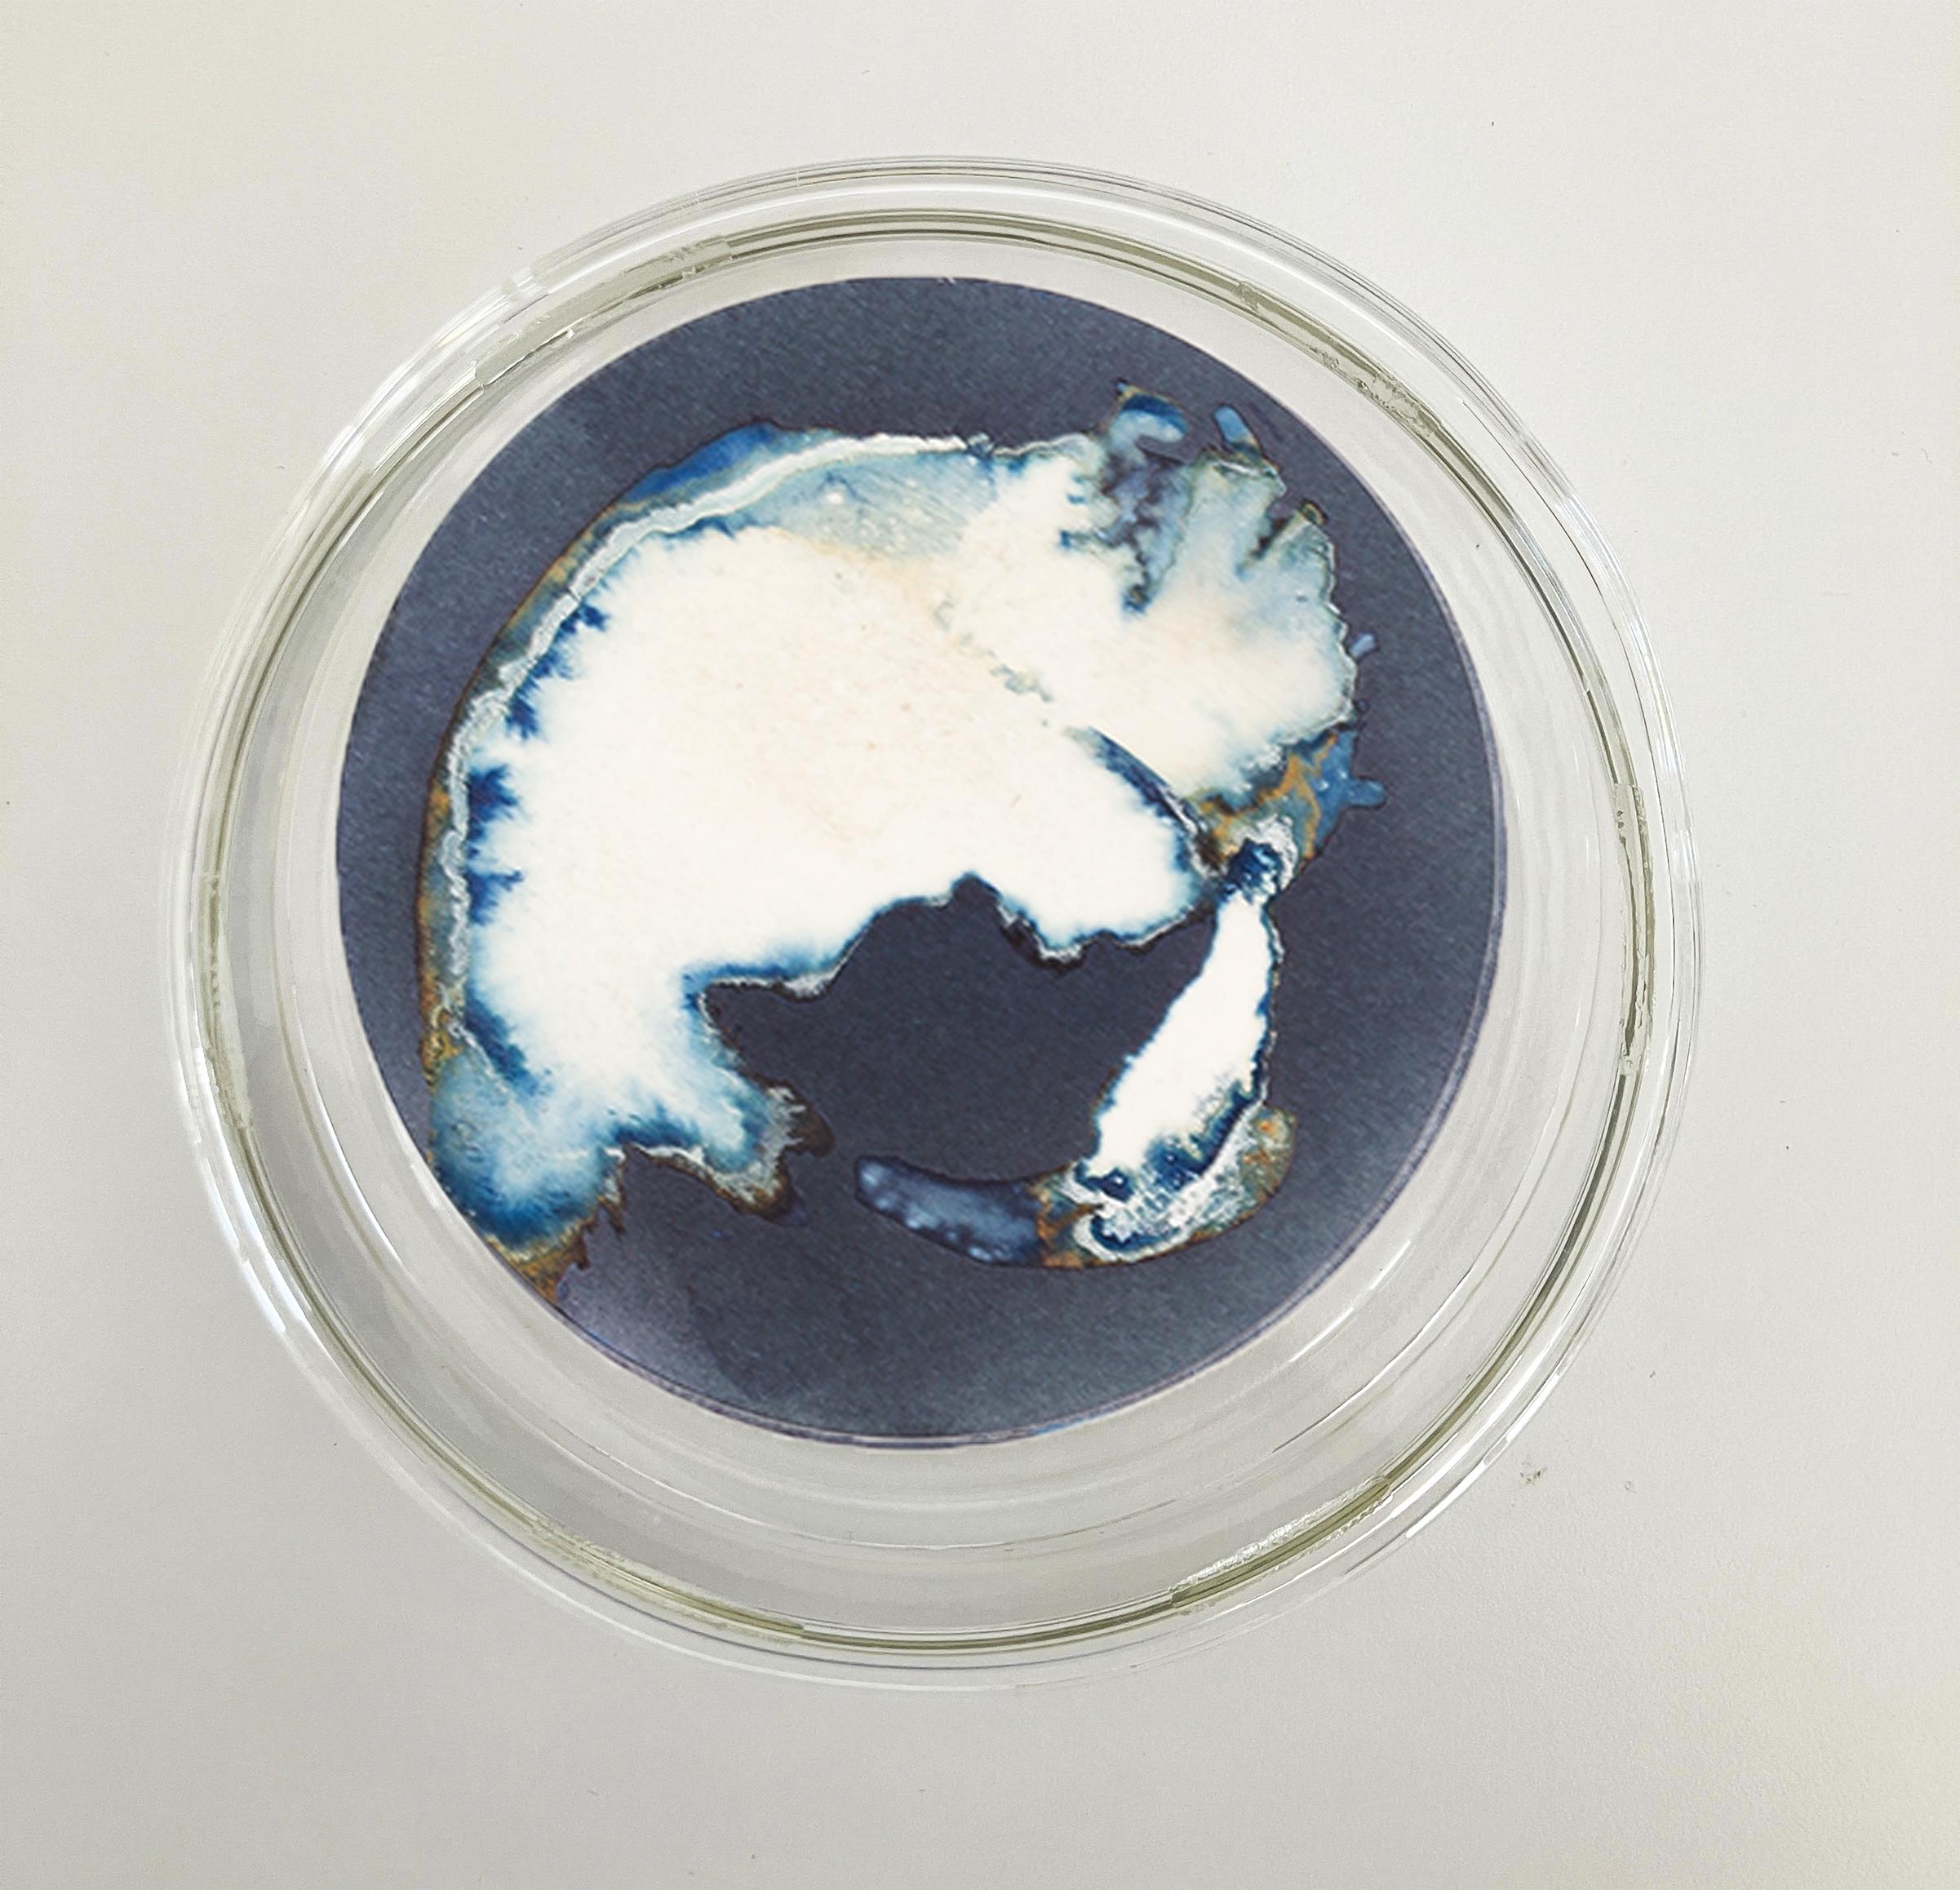 Esponjas 8, 11 y 16, 2022 by Paola Davila 
From the series Mareas
Cyanotype on 300 gr cotton paper
Mounted in a high-resistance borosilicate glass petri dish
Overall size: 36 cm Dm x 12 cm H x 2.4 cm Deep.
Individual Image size: 10.5 cm D. 
Each